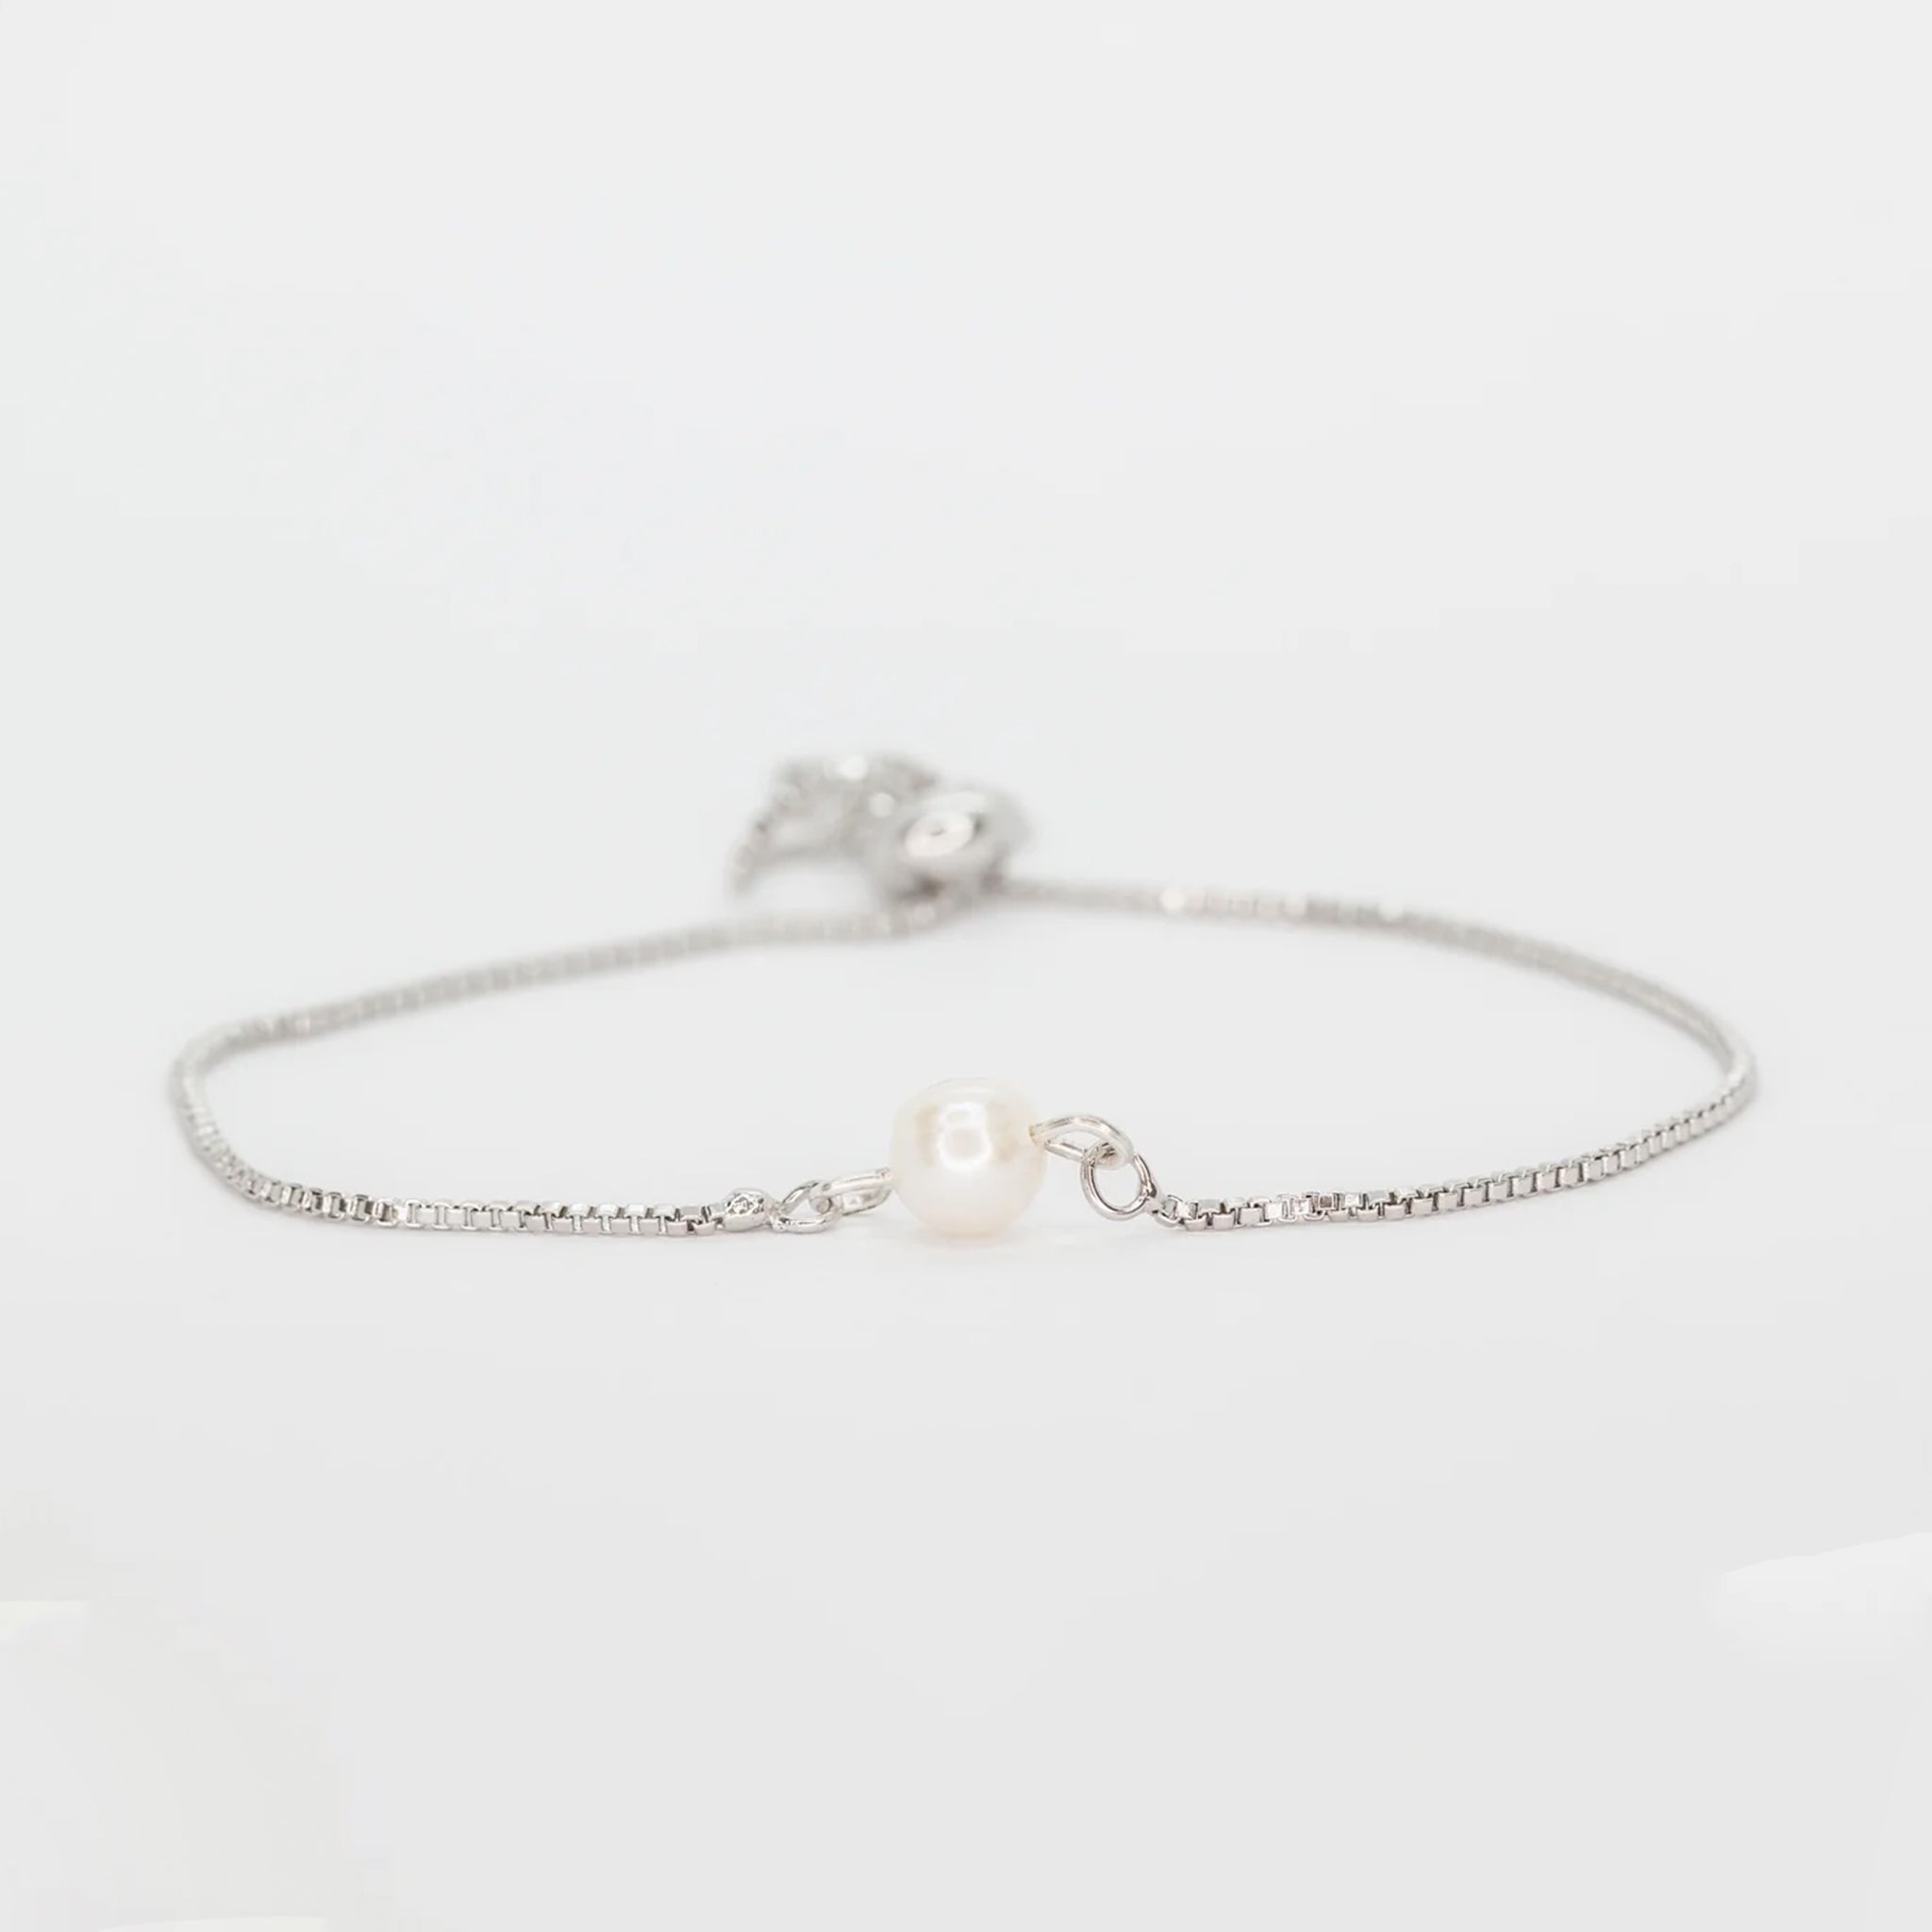 A circle freshwater pearl in the center of a dainty chain bracelet.